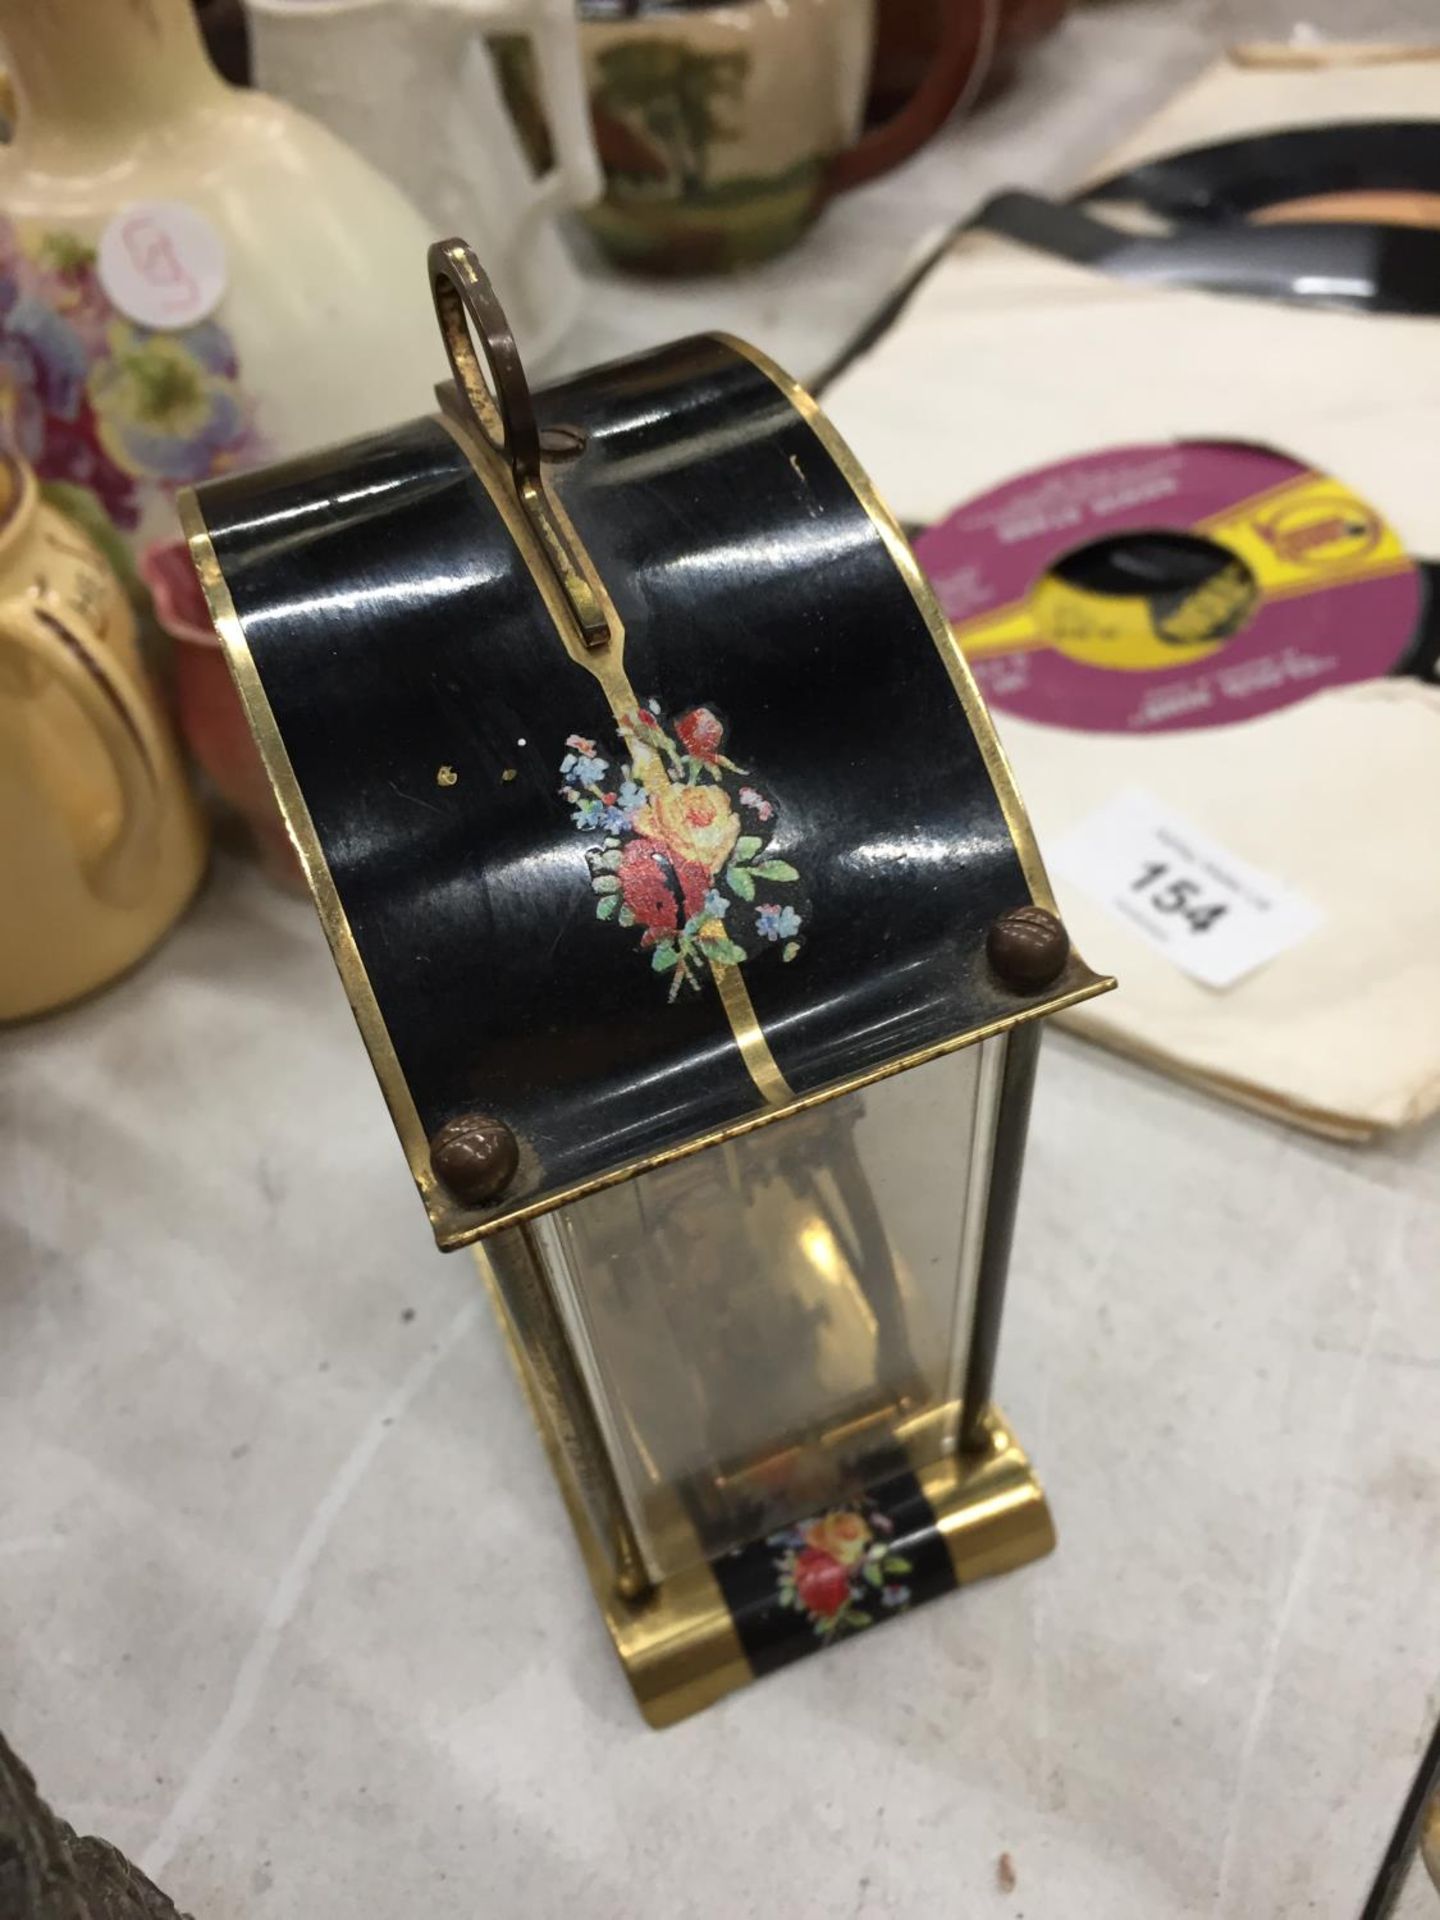 A SMALL GERMAN MANTLE CLOCK WITH FLORAL PATTERN - Image 4 of 4